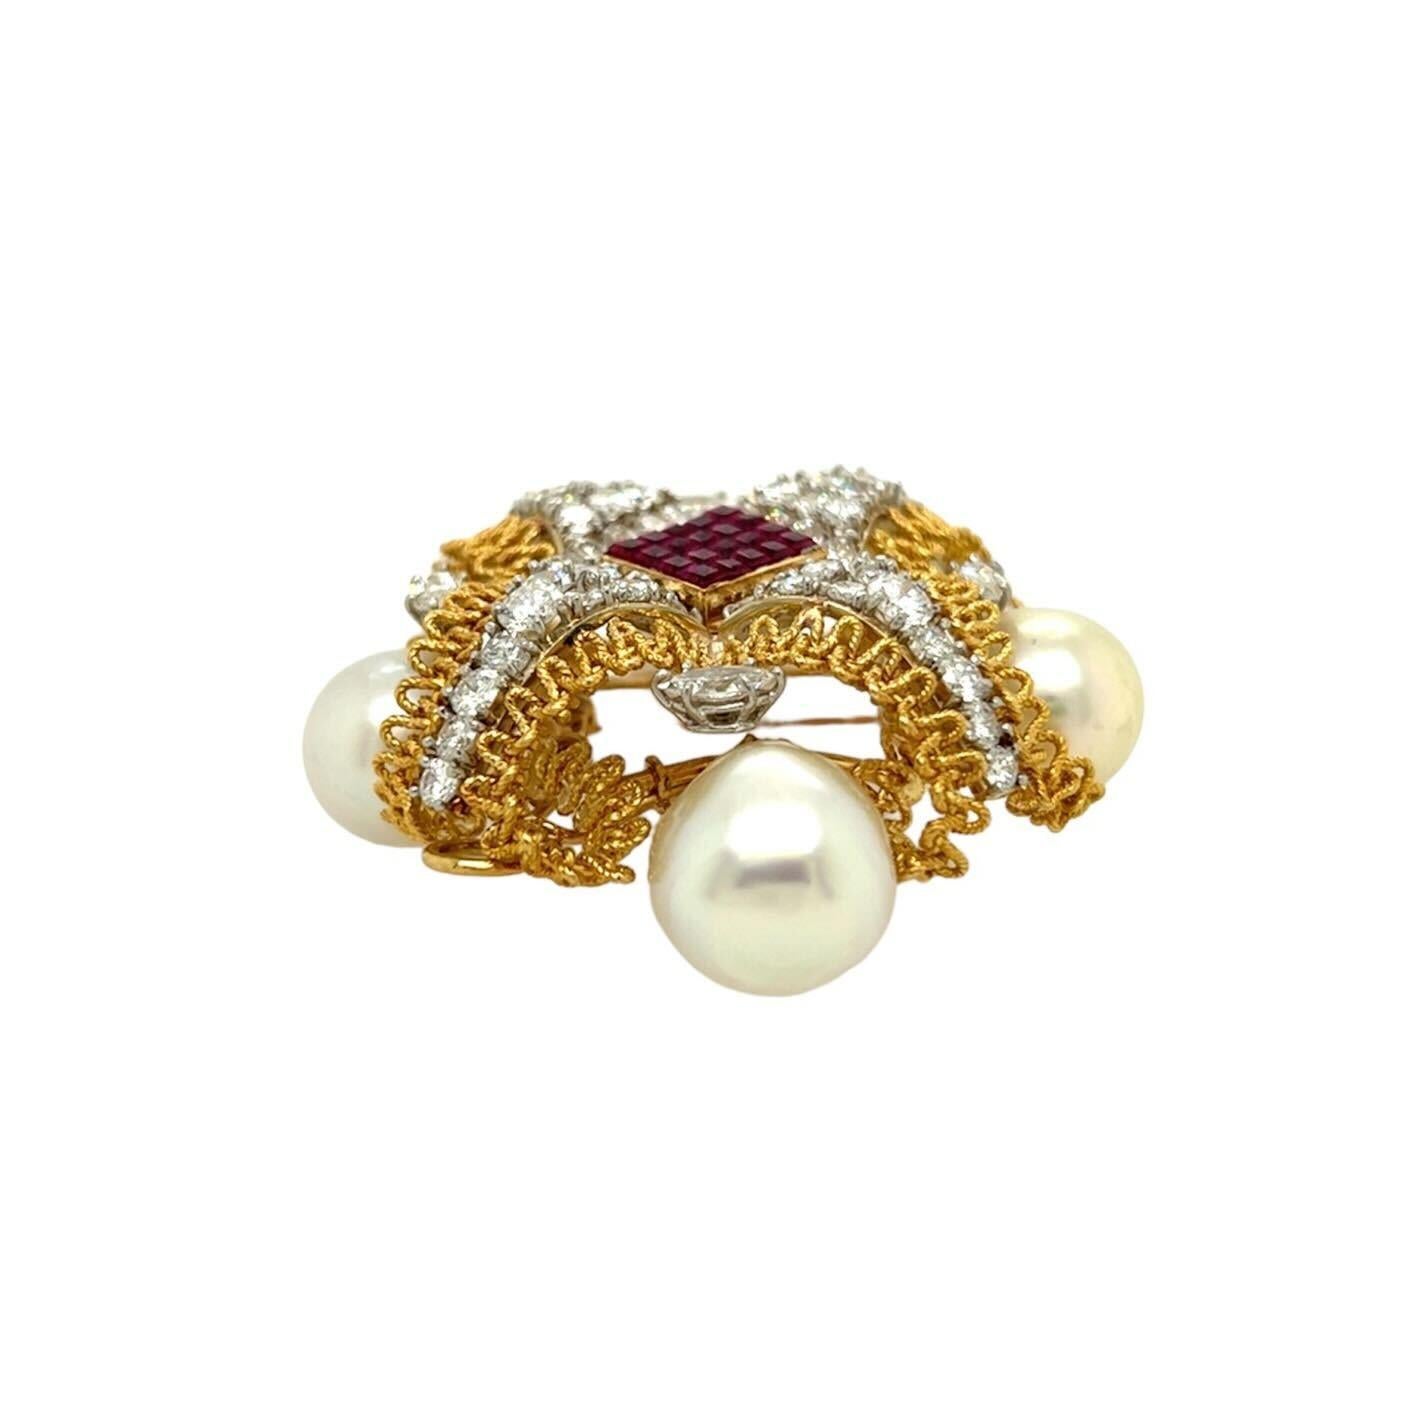 Round Cut Yellow Gold, White Gold, Ruby and Diamond Brooch